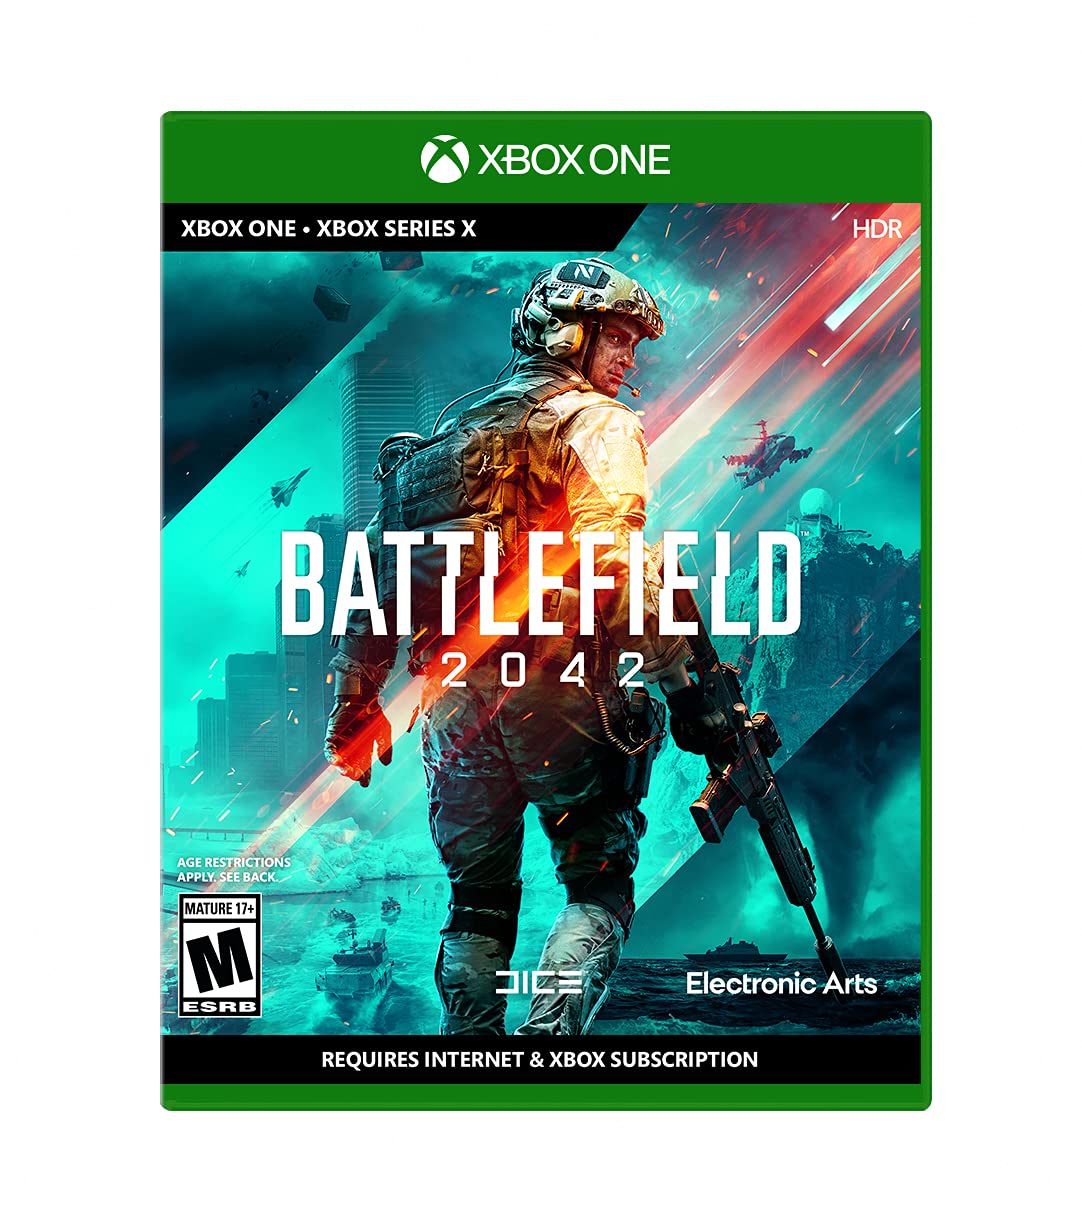 Battlefield 2042 - Xbox One for $29.99